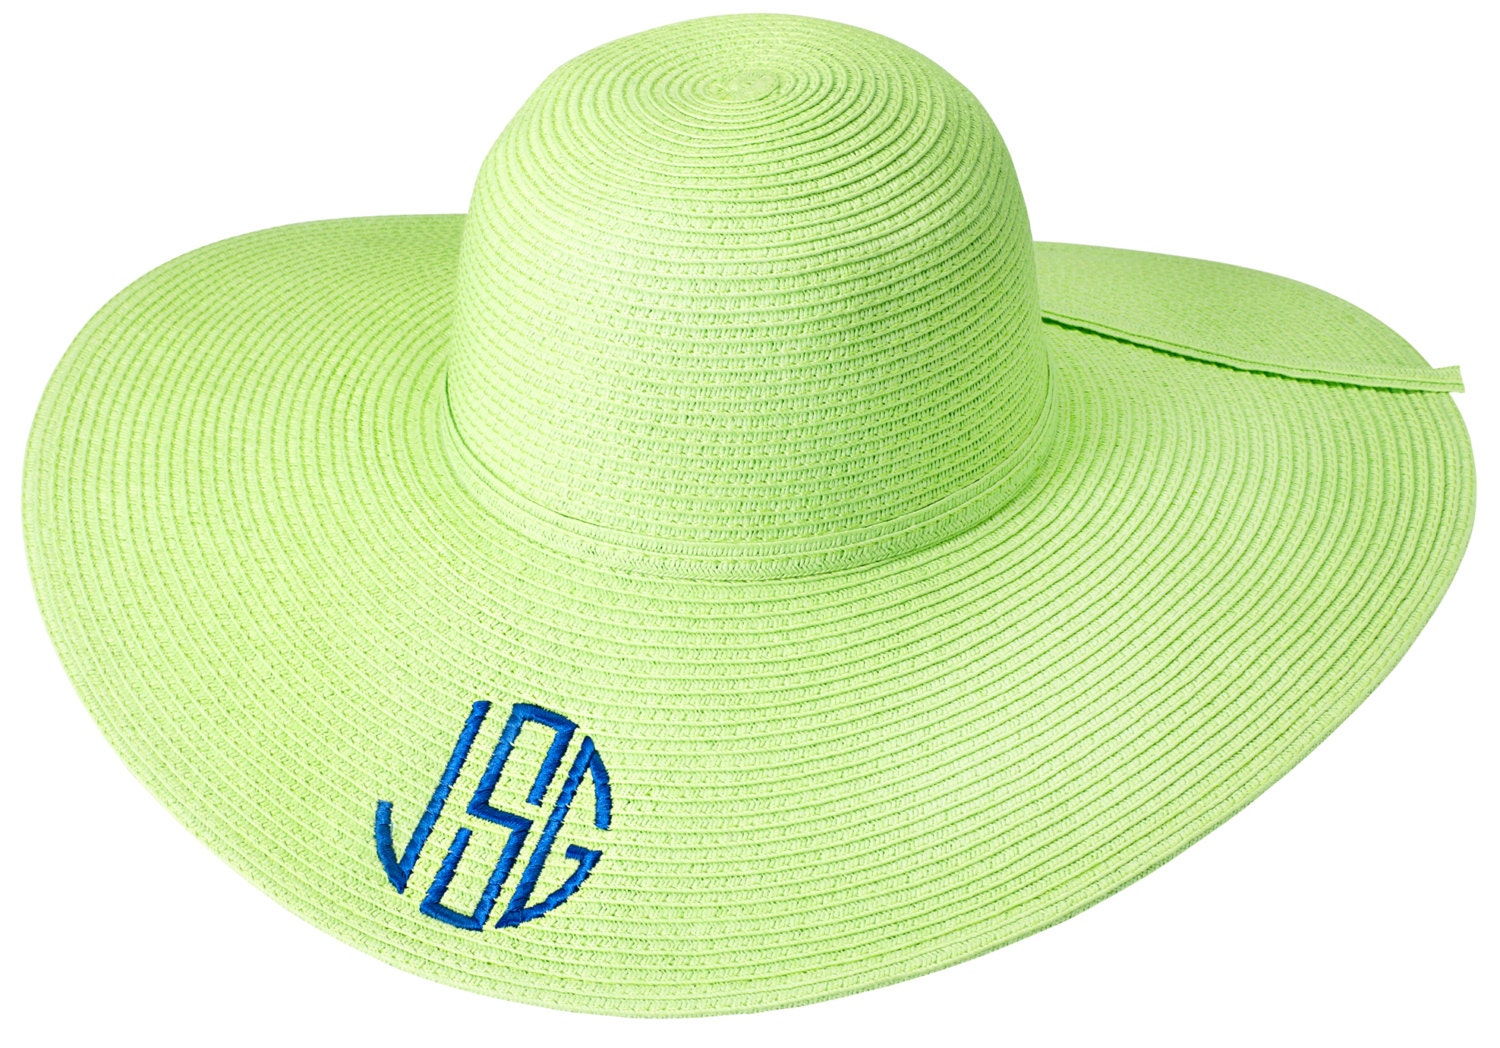 Personalized Lime Green Floppy Sun Hat - Monogrammed Beach Pool Derby